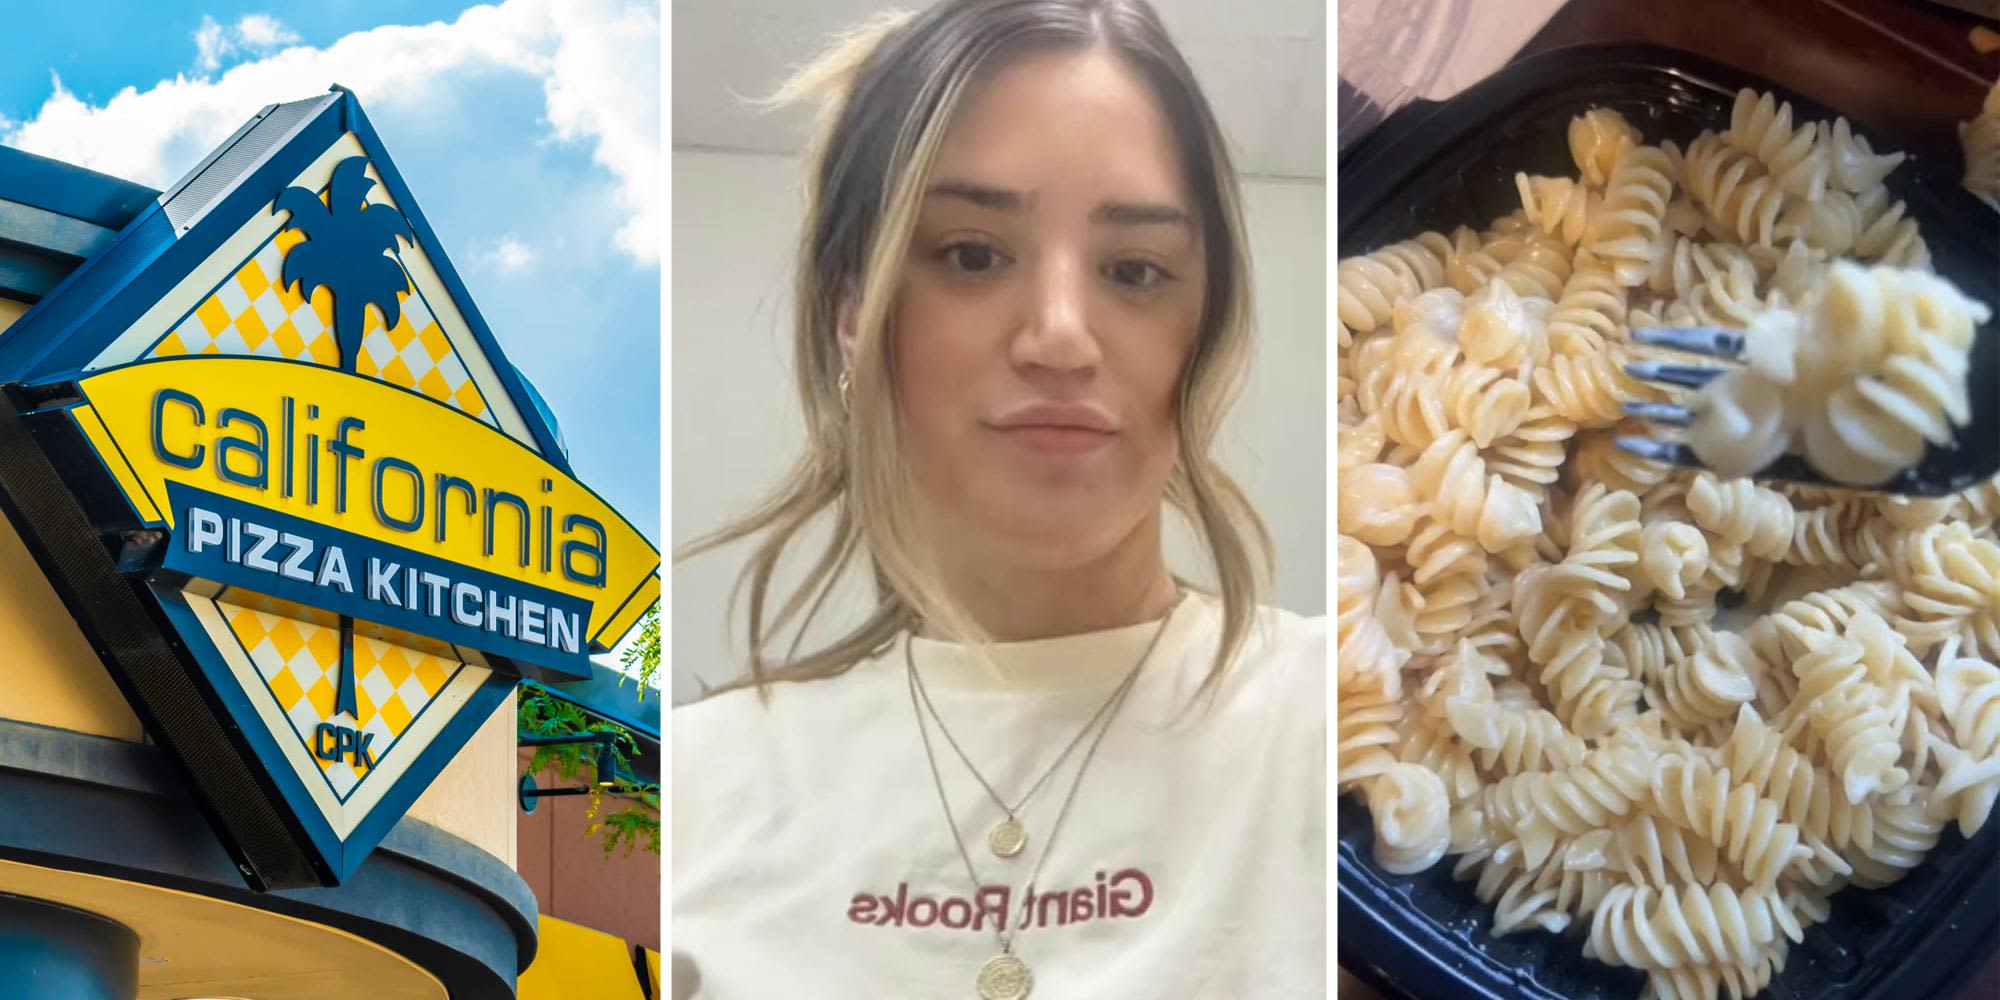 ‘I’m confused if California Pizza Kitchen is like trolling people now?’: Woman orders mac and cheese from California Pizza Kitchen. She can’t believe what she received